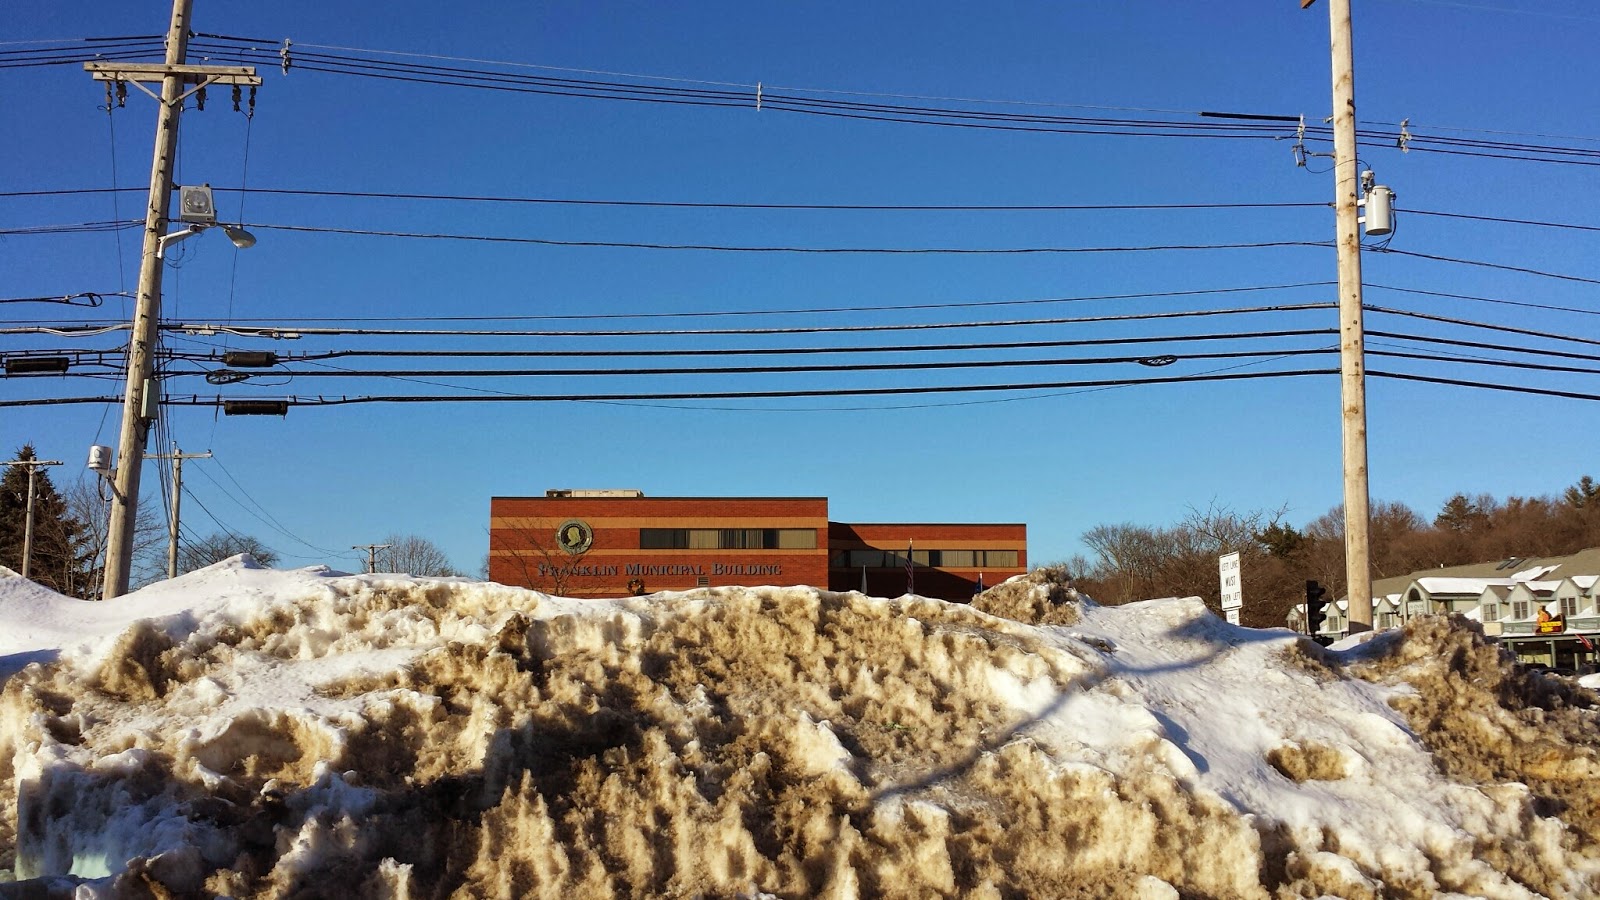 Municipal Building - hidden behind the snow piles at the Big Y parking lot